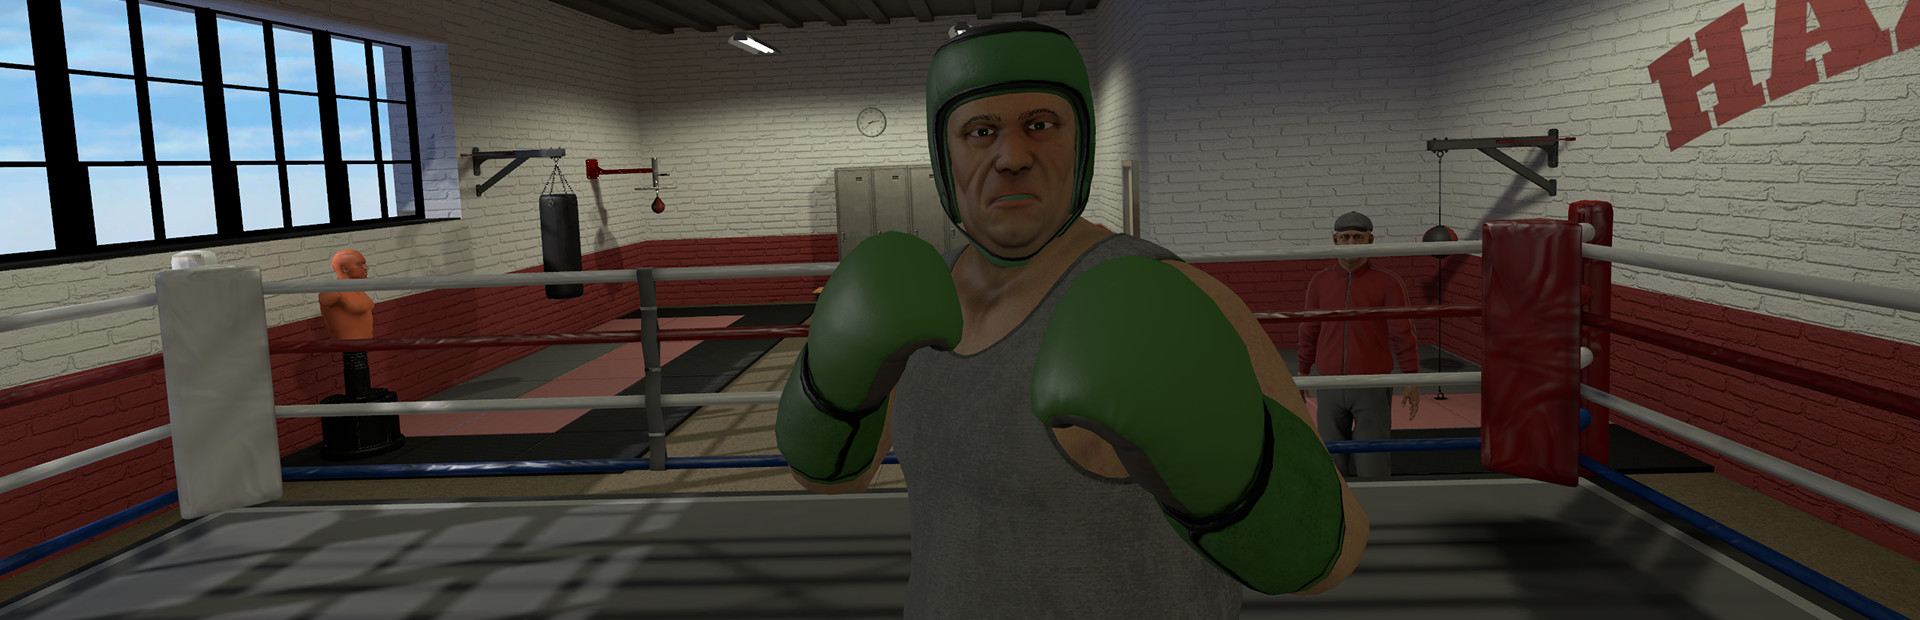 The Thrill of the Fight - VR Boxing cover image